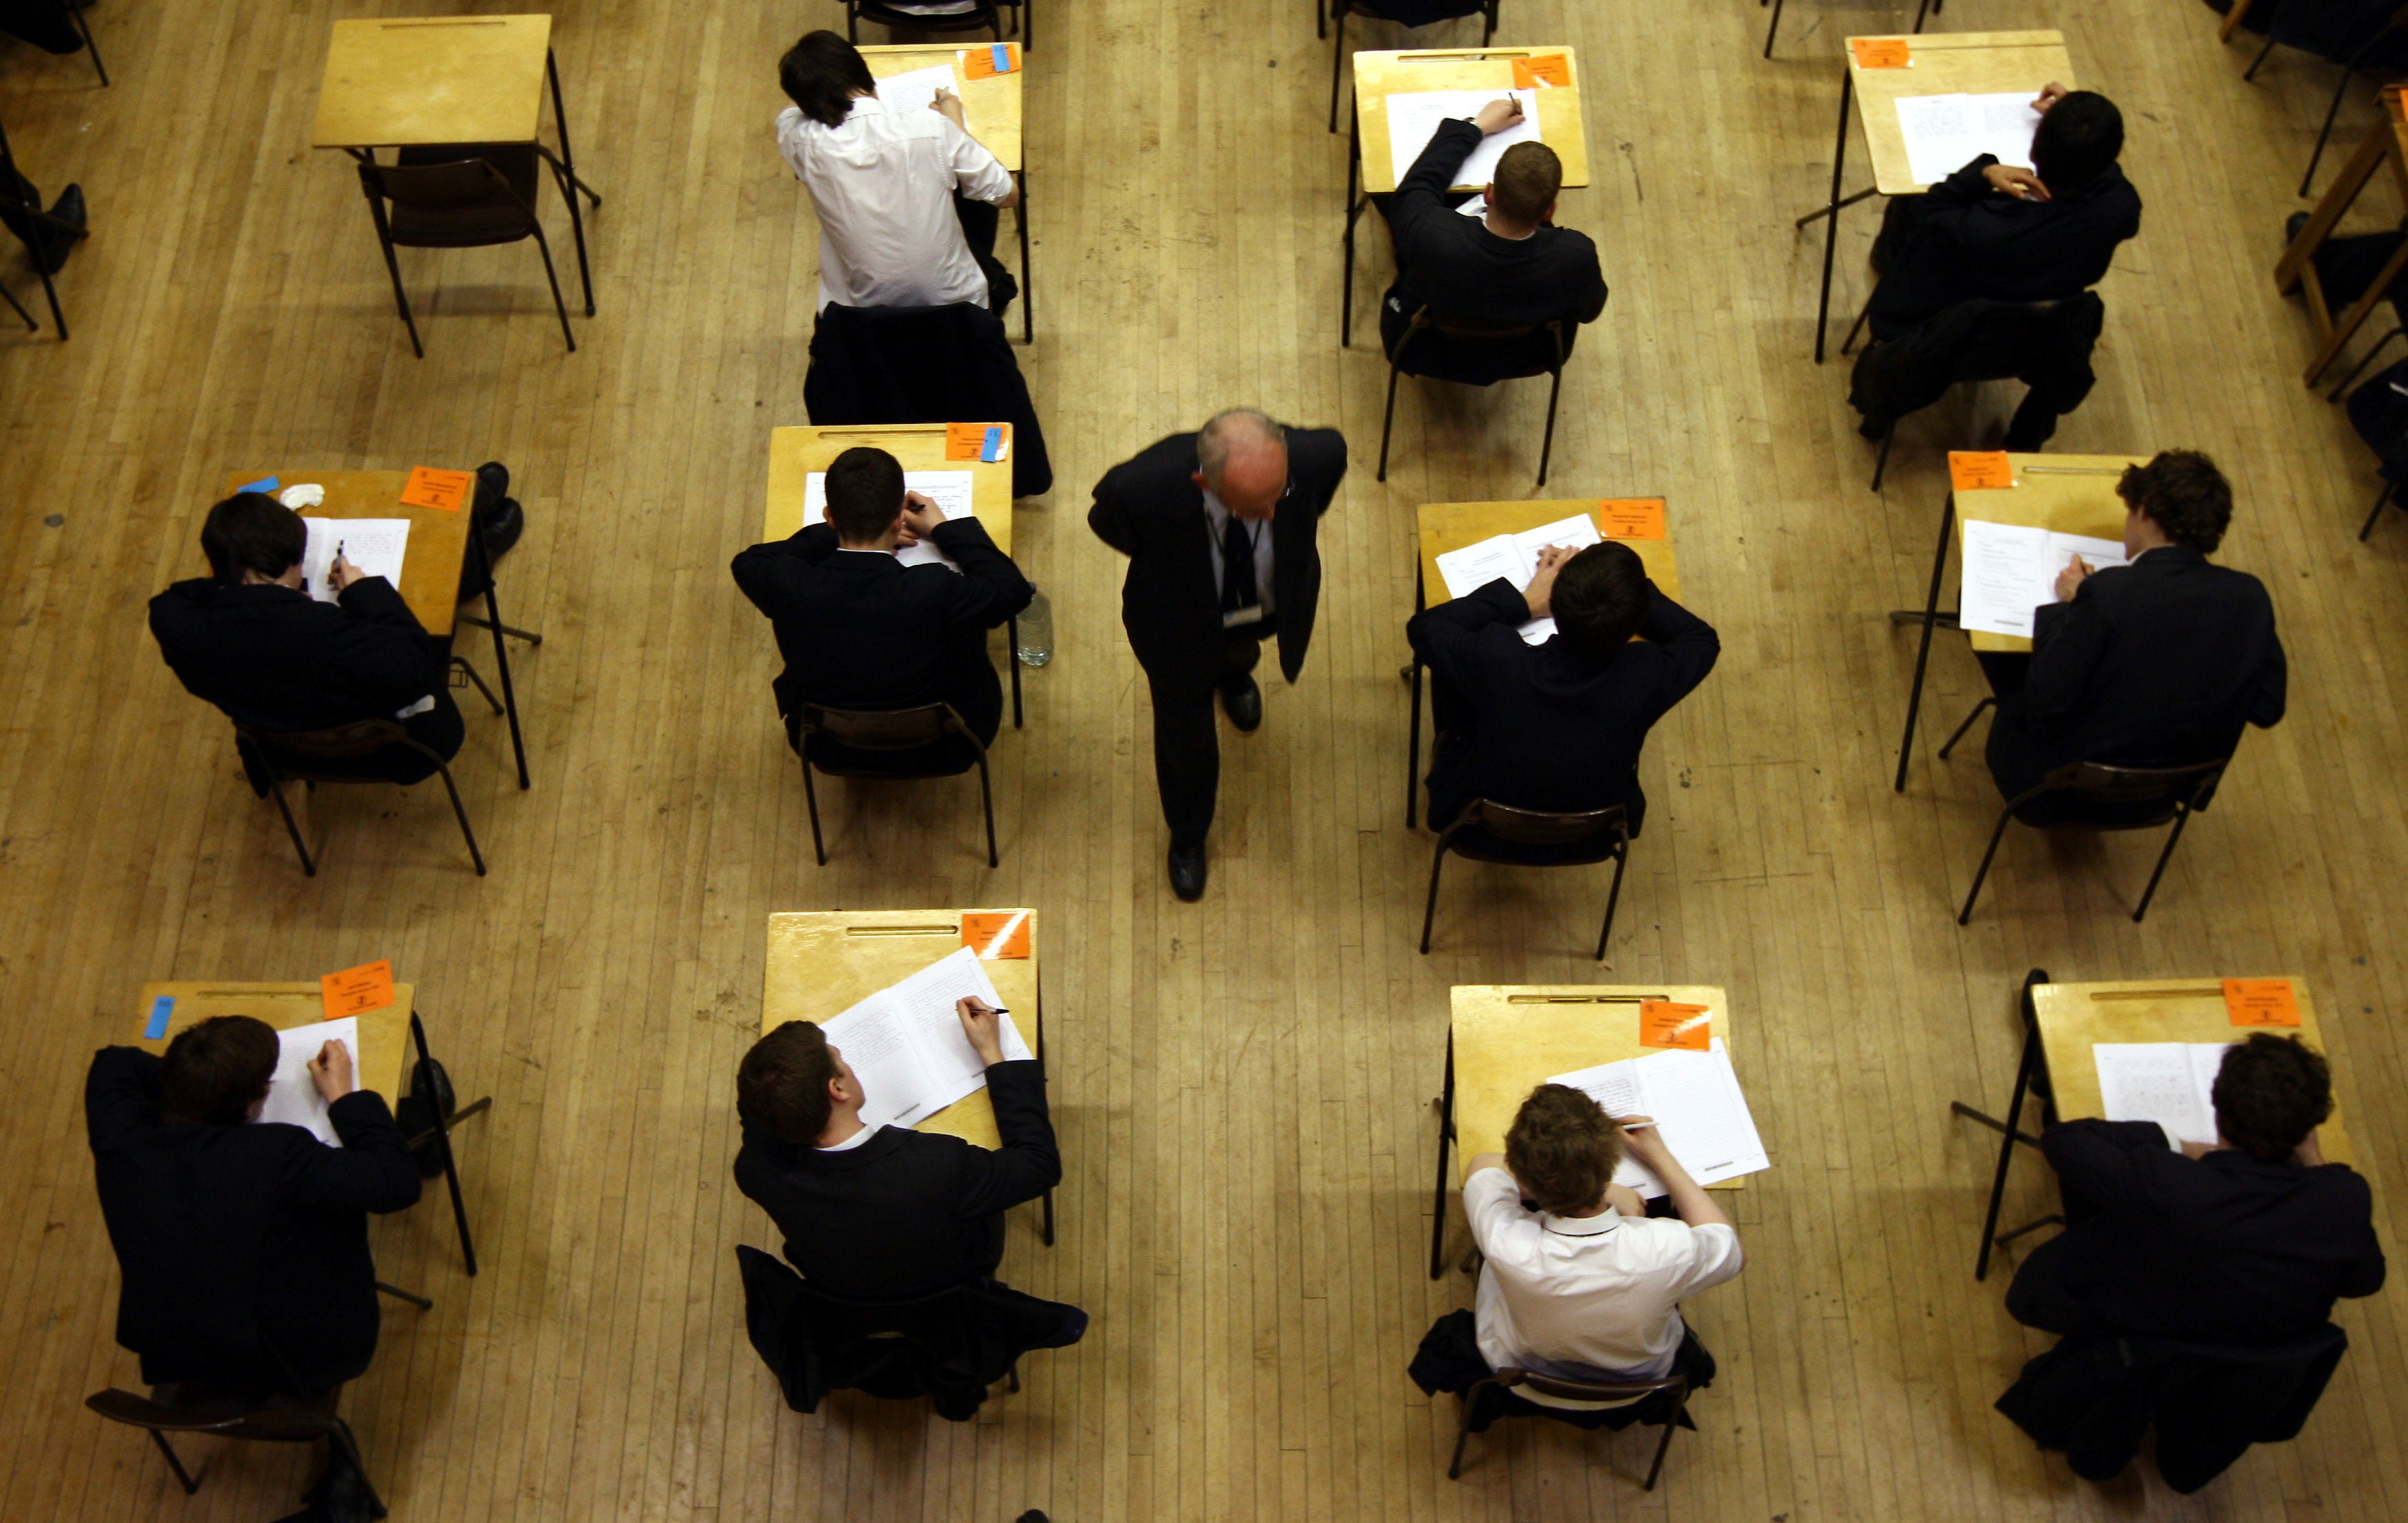 Some 80 per cent have seen pupil absences in their school because of self-isolating and/or a lack of access to tests